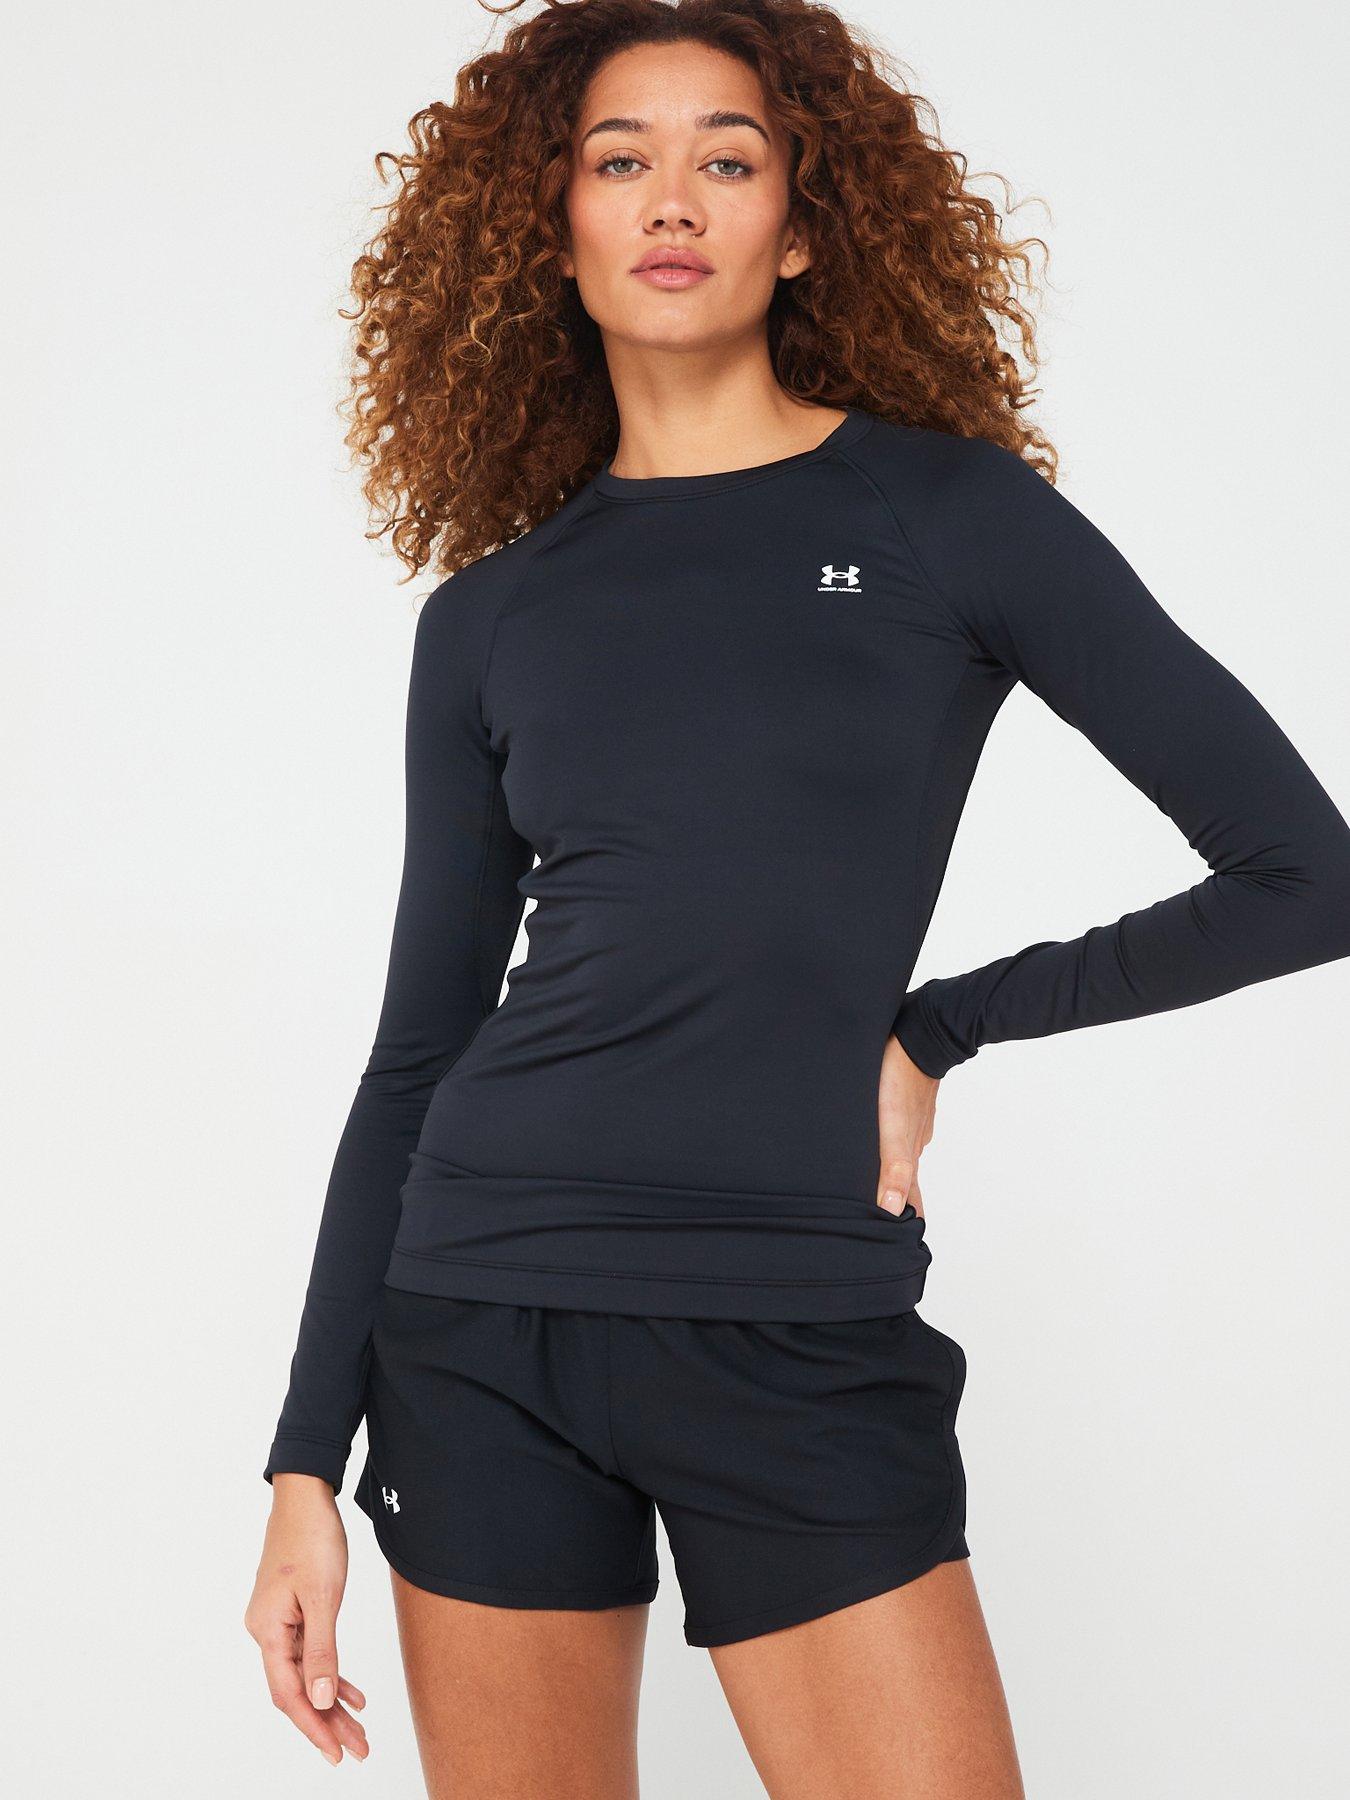 Under Armour ColdGear Authentics Crew base layer for women – Soccer Sport  Fitness